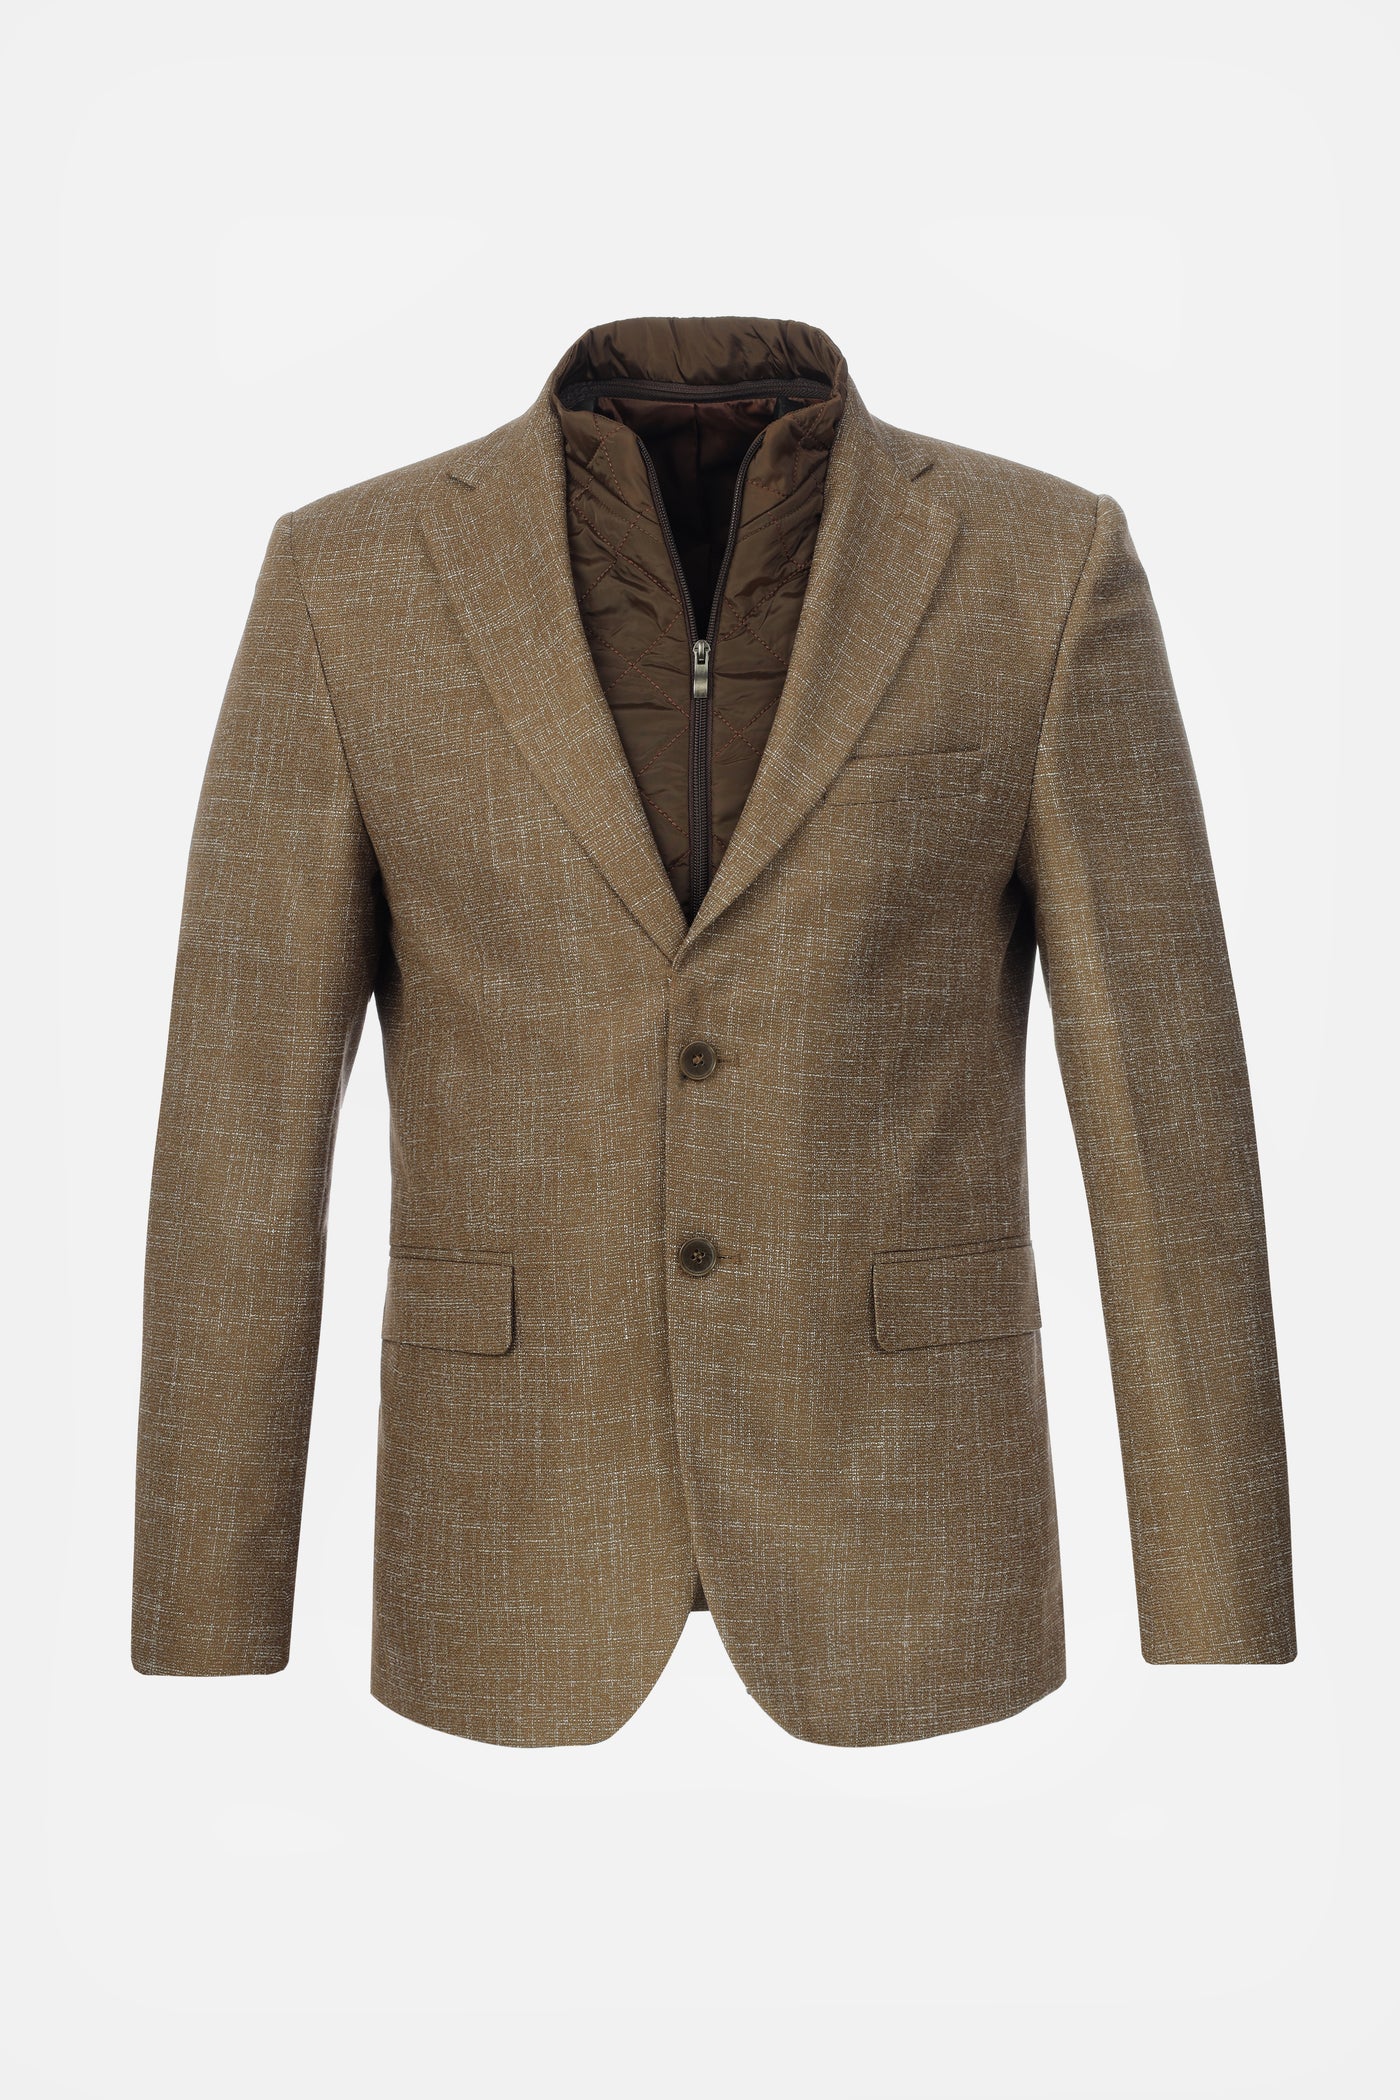 Woven Jaquard  Walnut Brwon & White Blazer with removable padded piece